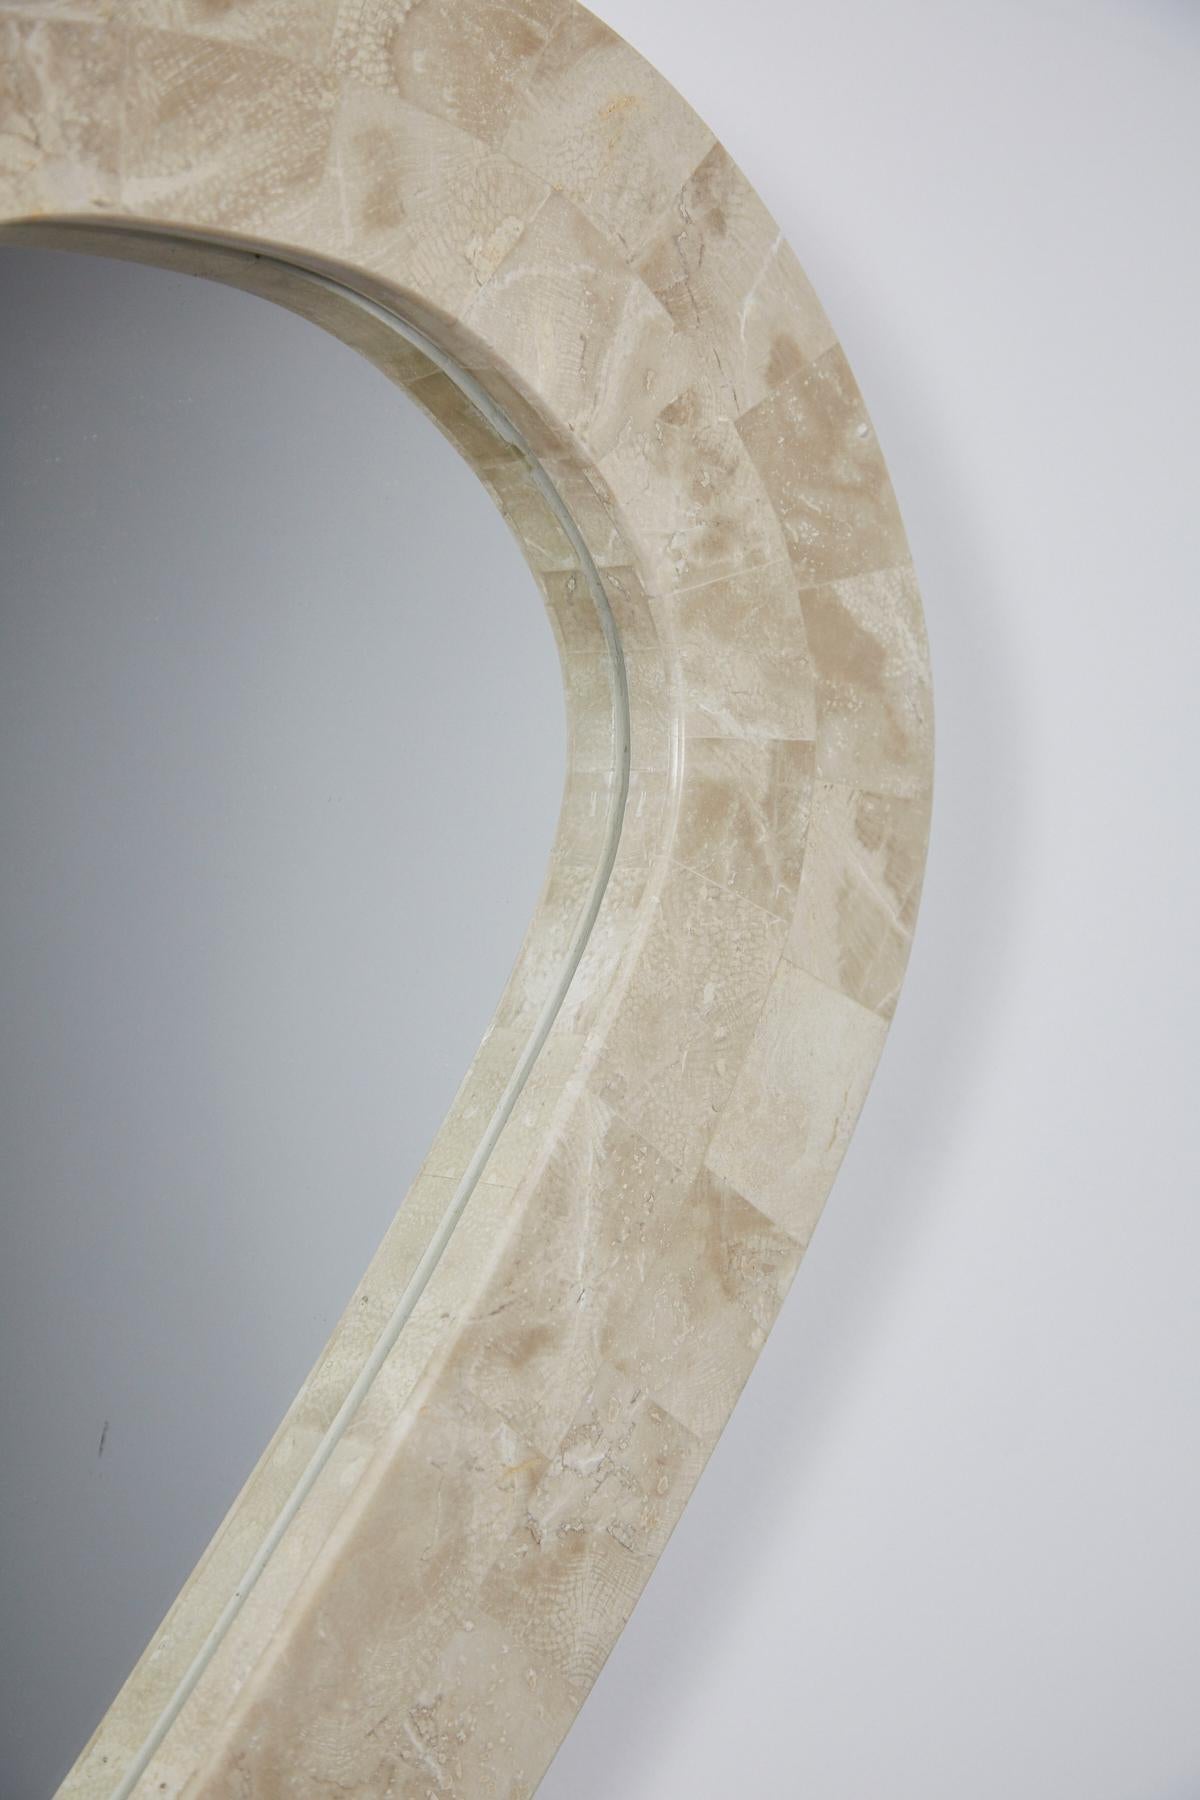 Philippine Postmodern Double Heart Beige Tessellated Stone Mirror, 1990s For Sale